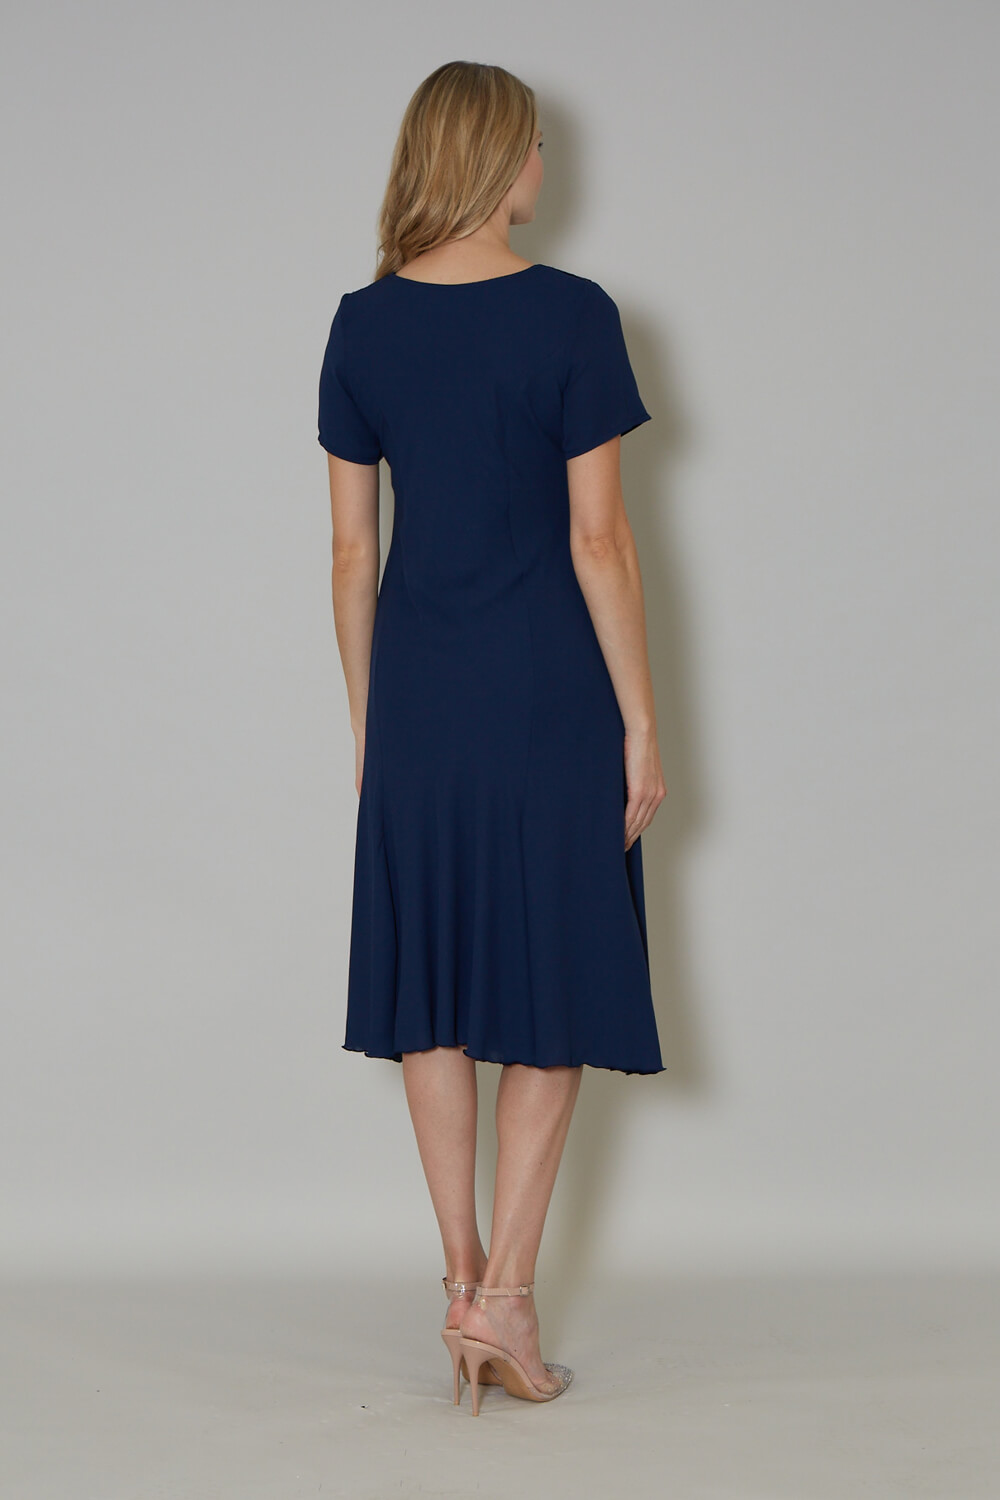 Navy  Julianna Georgette Fit and Flare Dress, Image 2 of 4